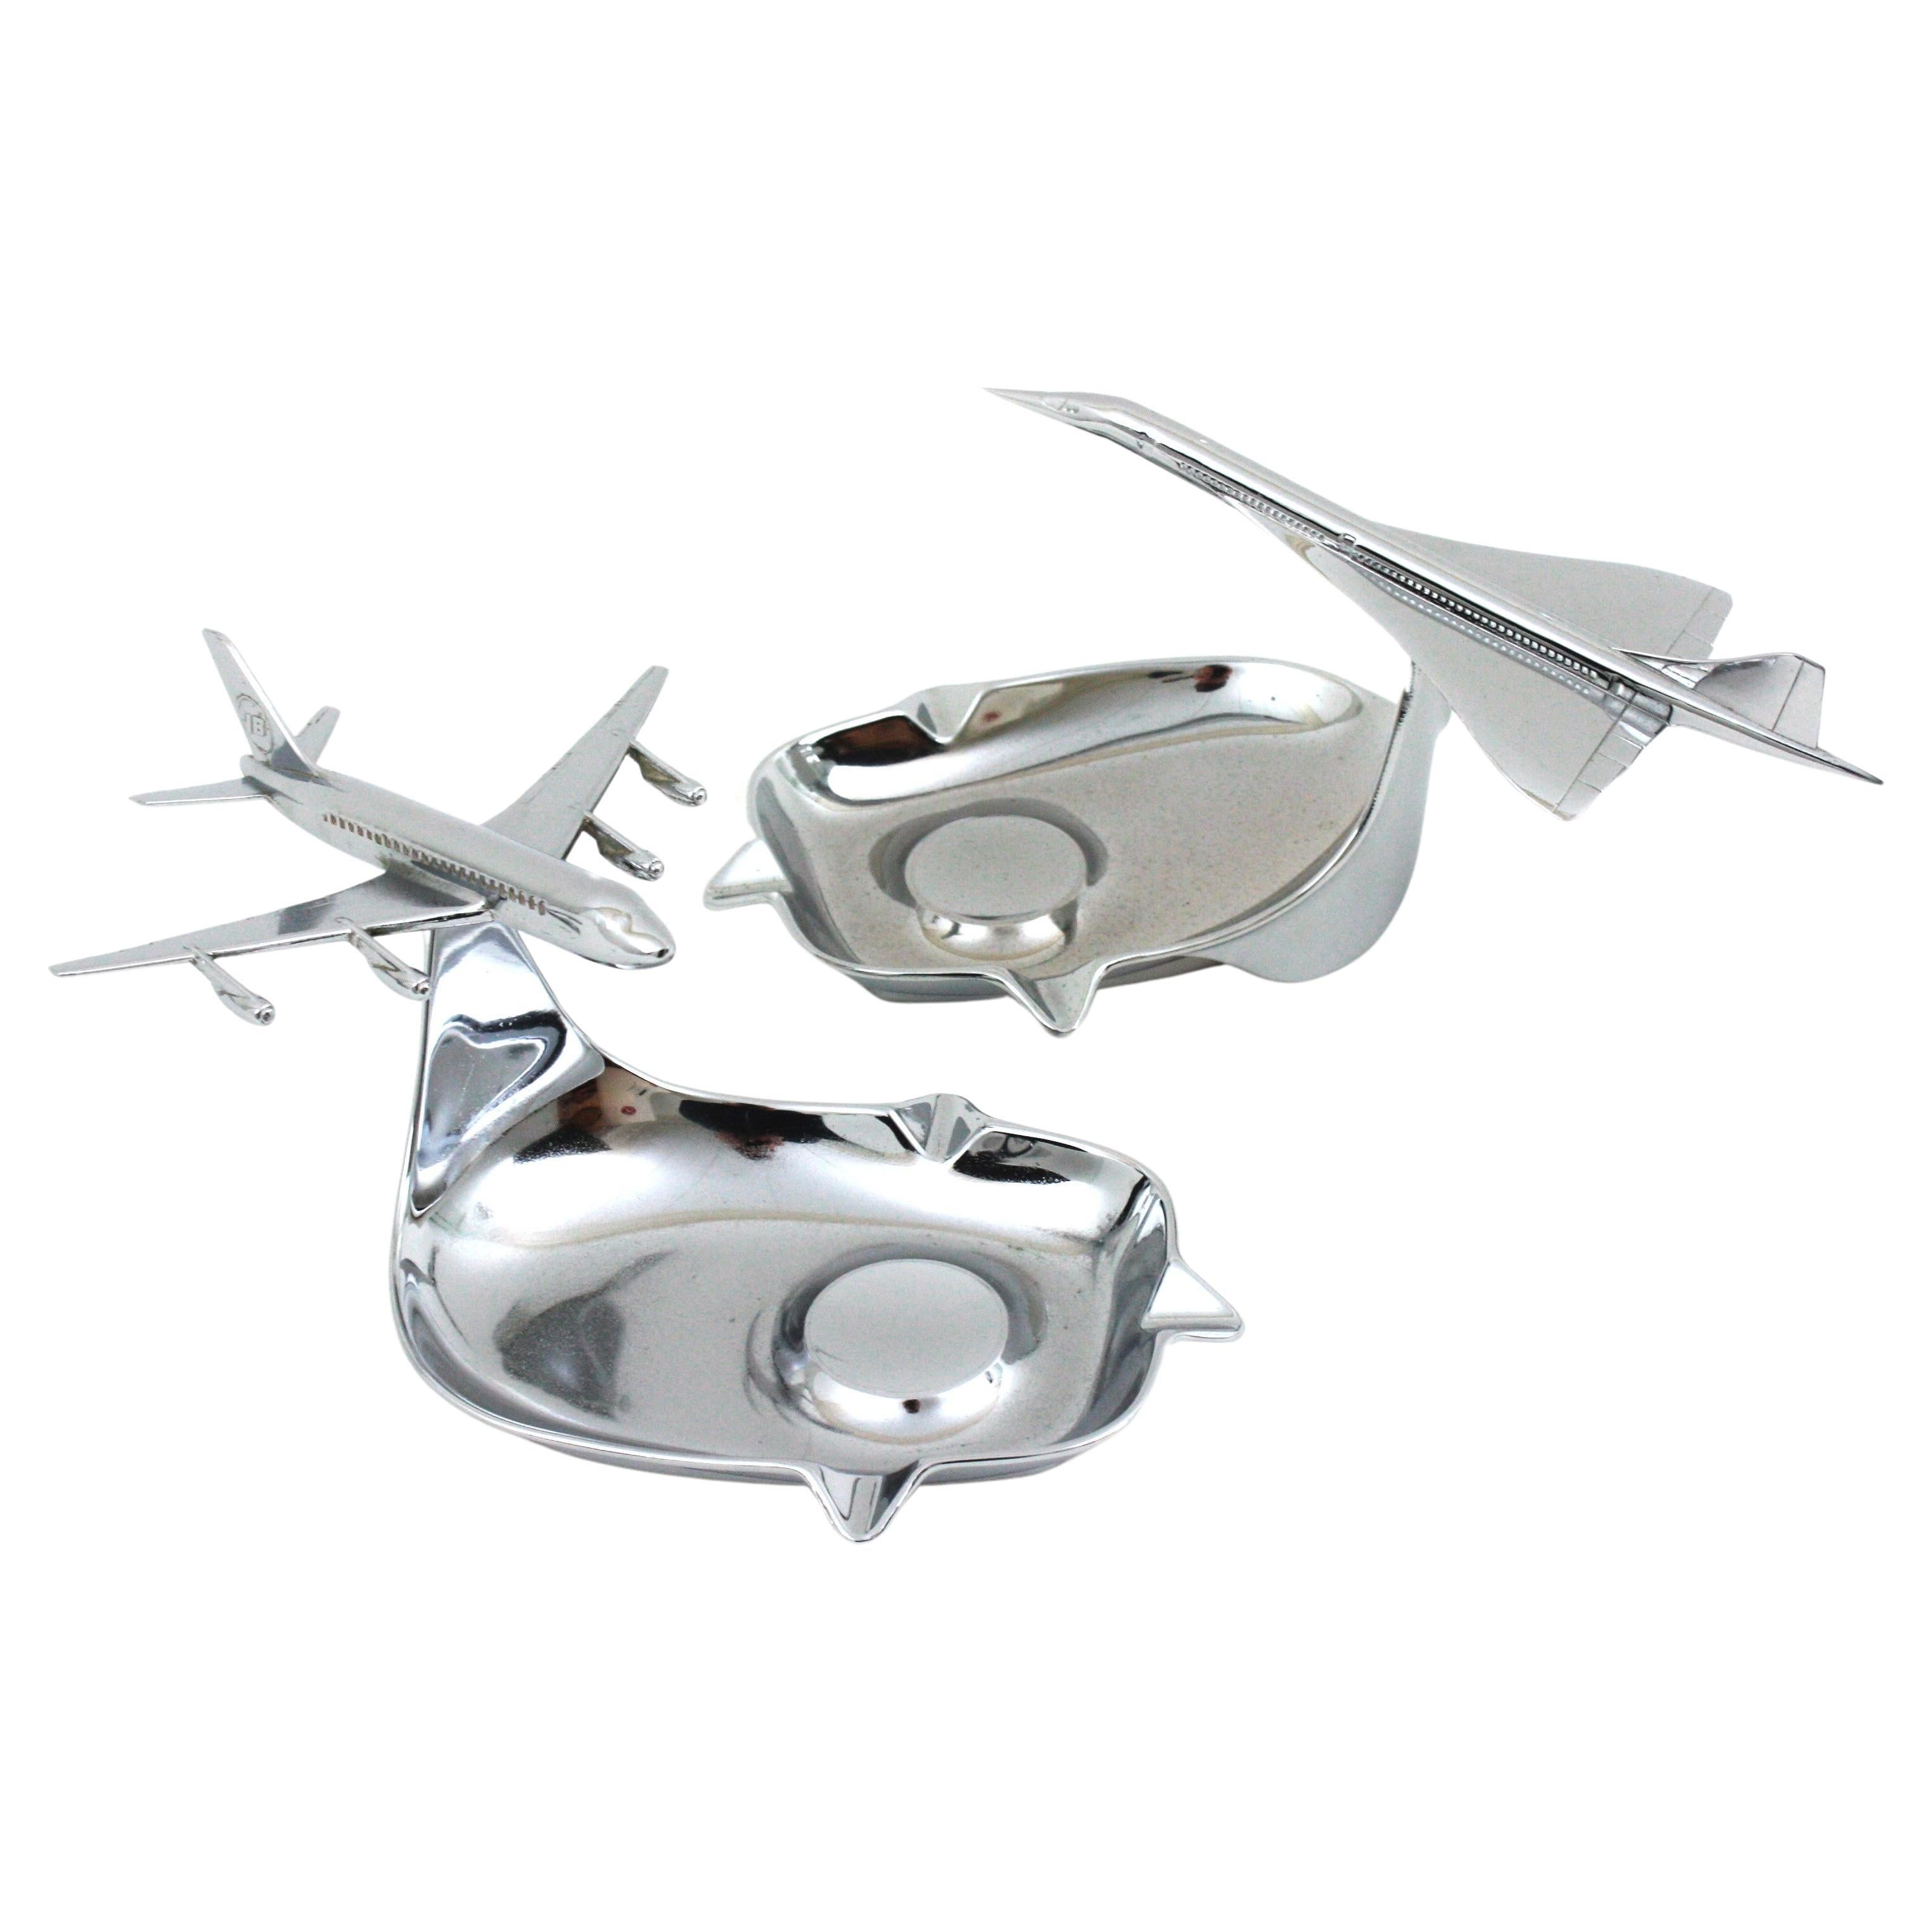 Pair Mid-Century Modern Chromed Steel Concorde and DC-8 Plane Ashtrays, Spain, 1950s-1960s
The set is comprised by a French Concorde and a Douglas DC-8 from spanish airline Iberia.
They were made of chromed metal and produced in